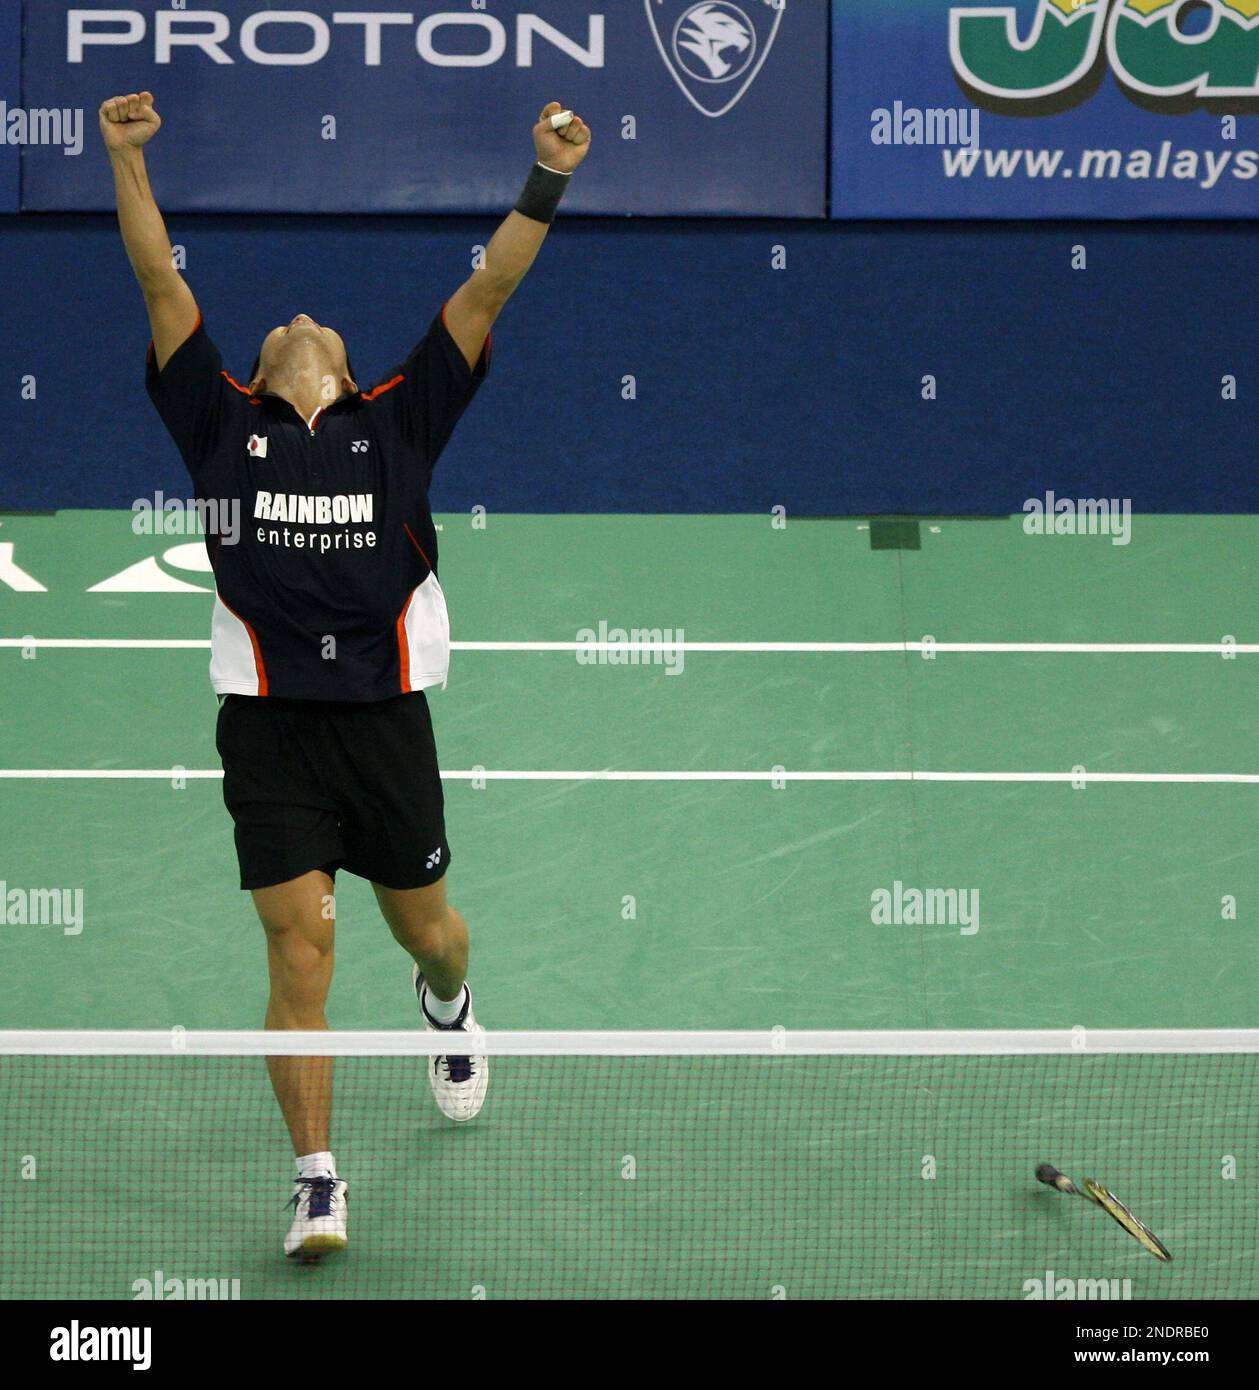 Japans Sho Sasaki celebrates after defeating Indonesias Simon Santoso during their semifinal match of the Thomas Cup badminton championships in Kuala Lumpur, Malaysia, Friday, May 14, 2010